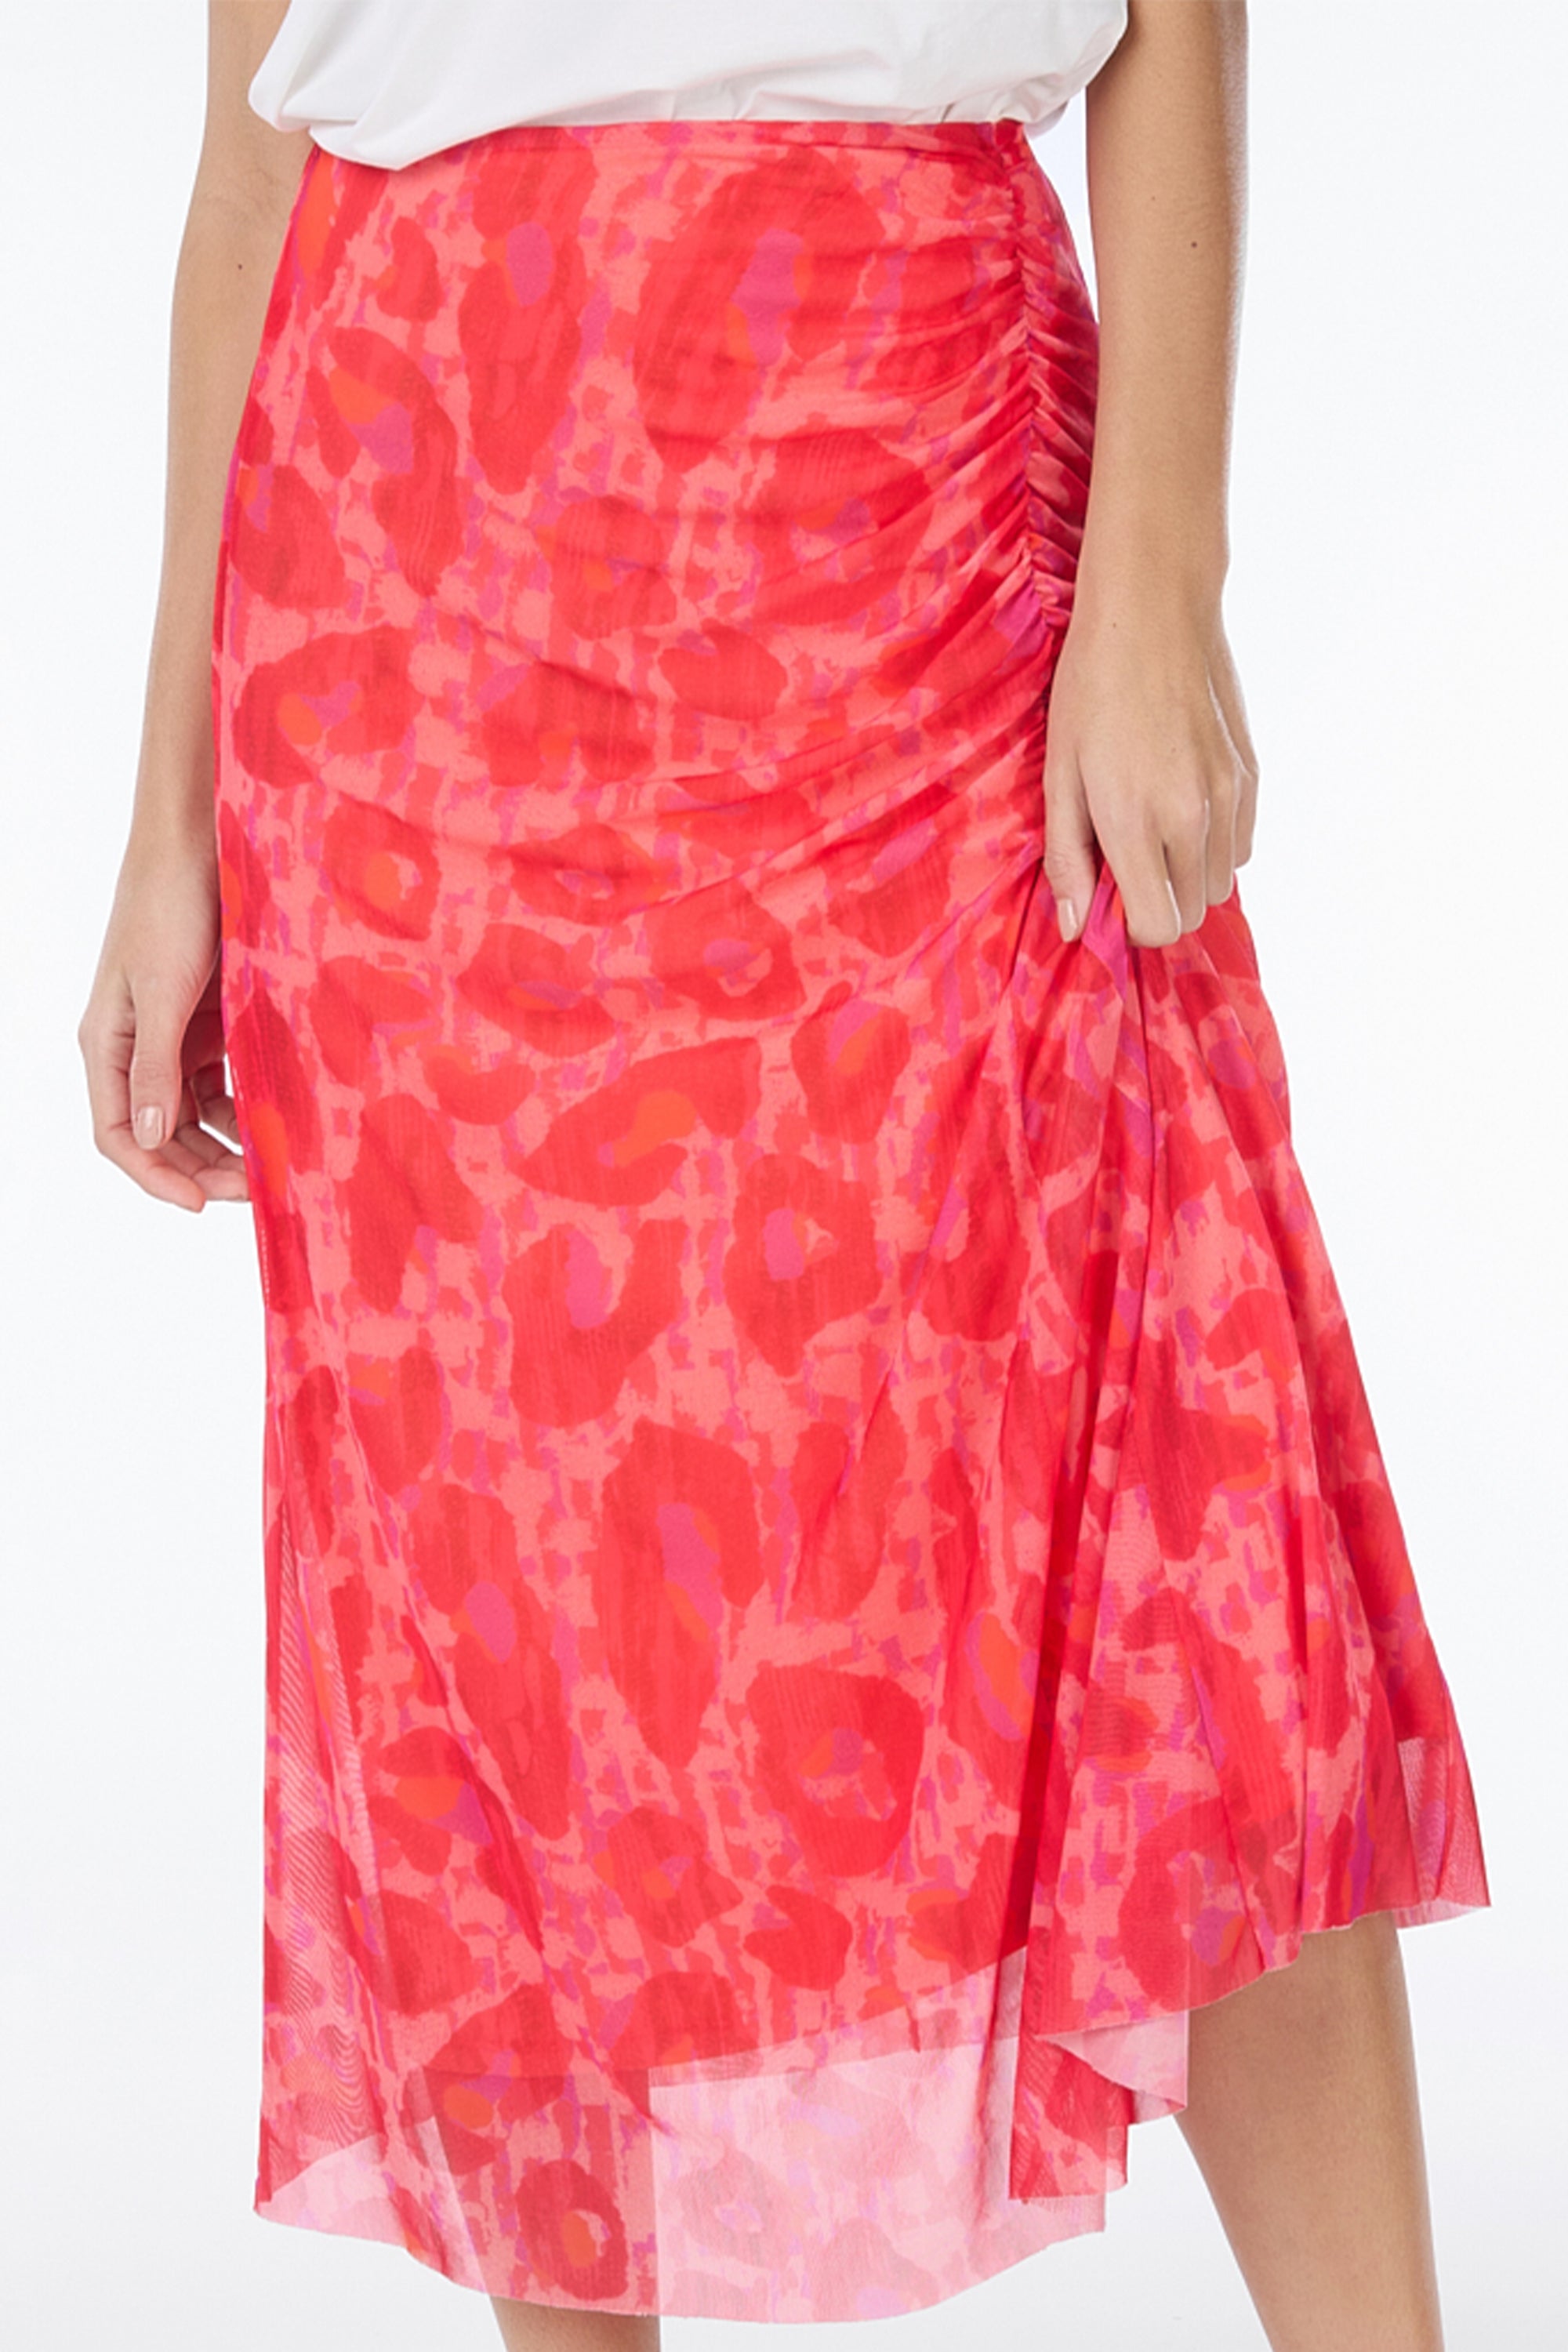 Front close up of Esqualo (SP2430008) Women's Mesh Pink Animal Print Midi Skirt with Side Gather in Hot Pink